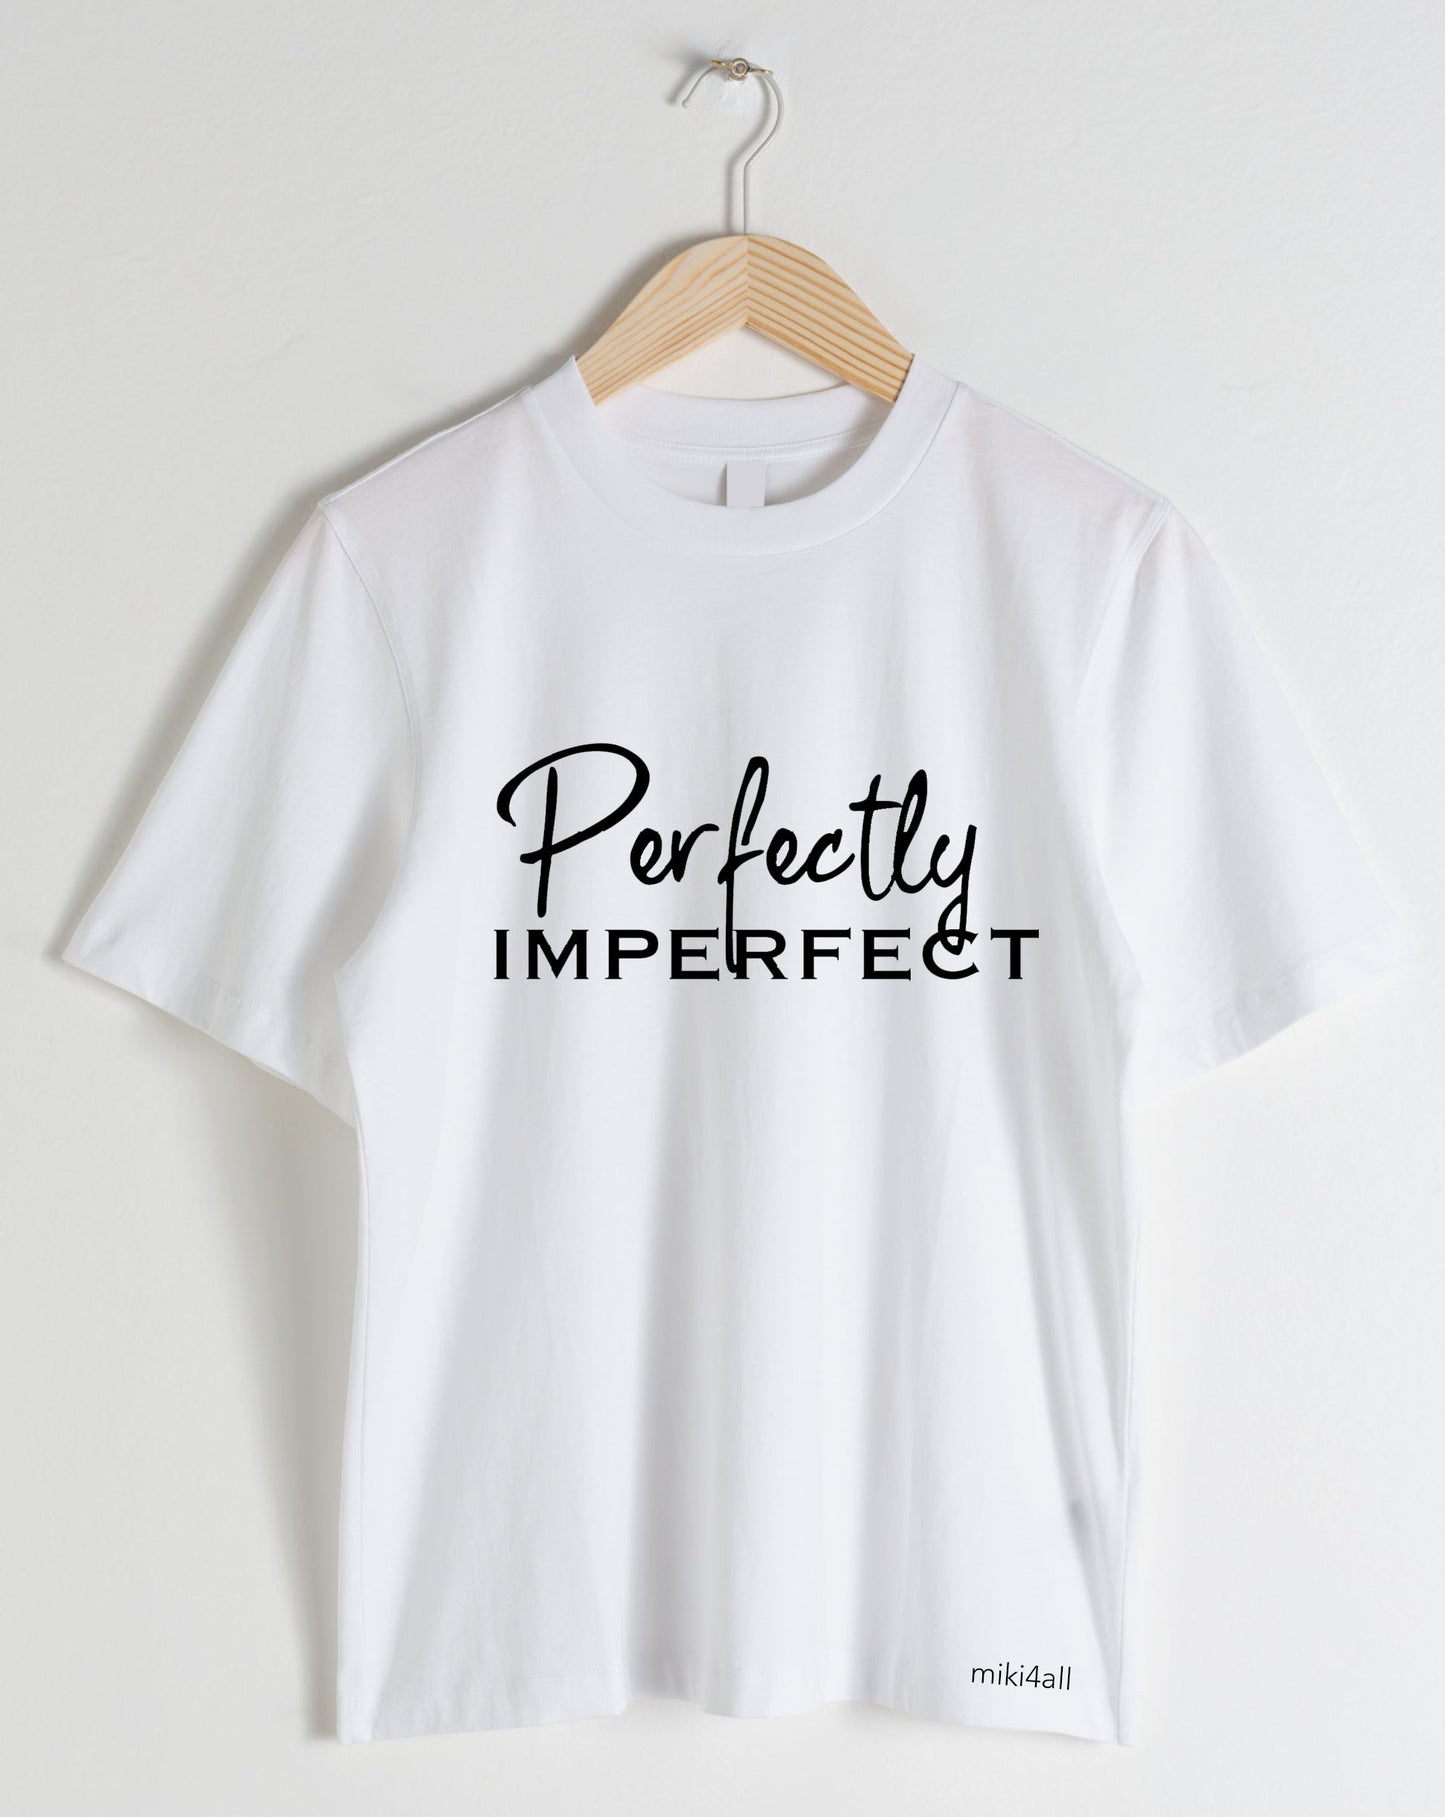 HEREN t-shirt "Perfectly imperfect"